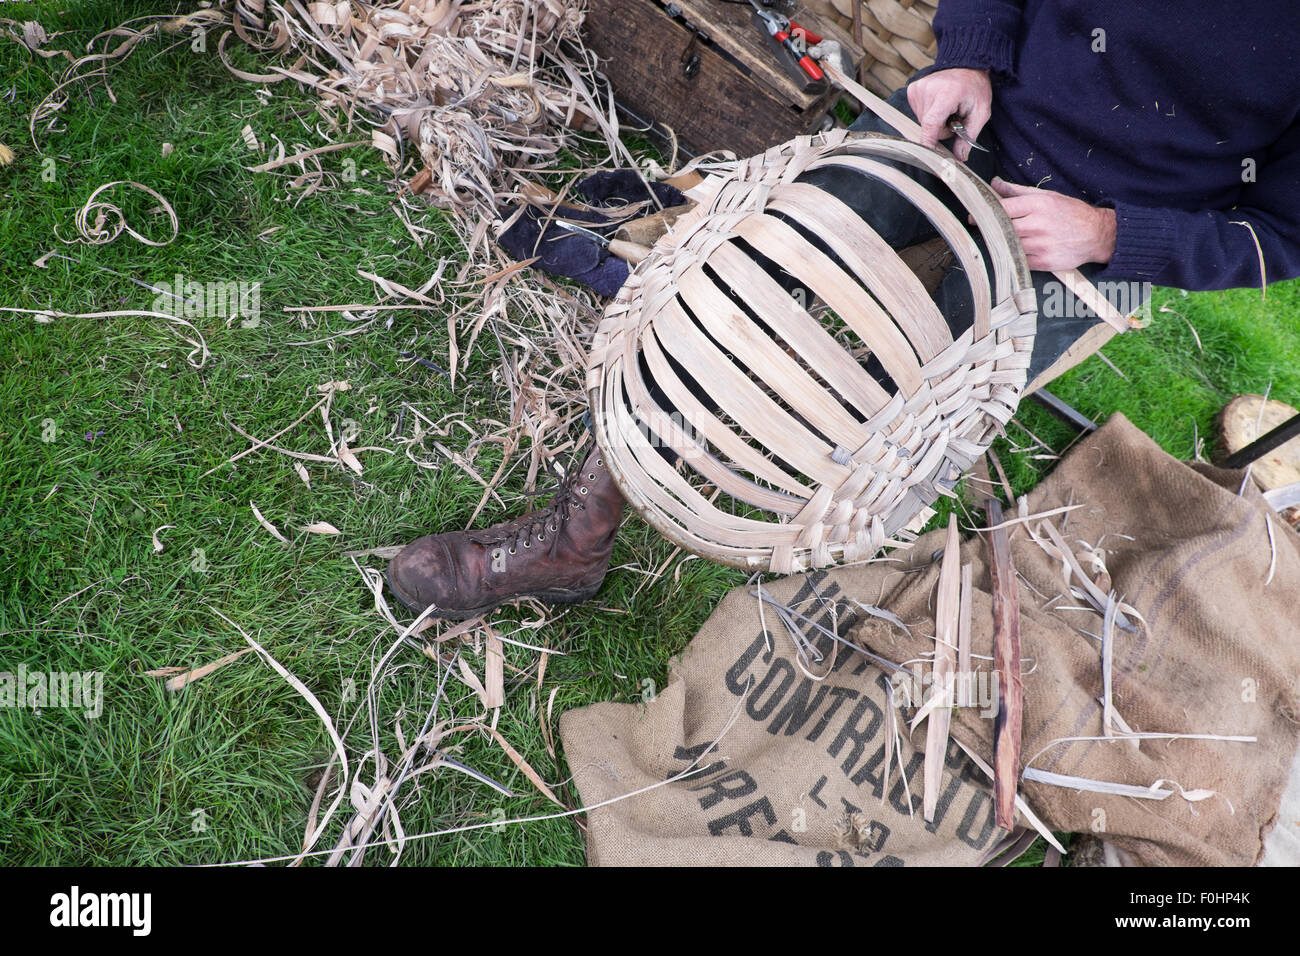 basket weaving demonstration at Lowther country show Penrith Cumbria 15.8.15 Stock Photo